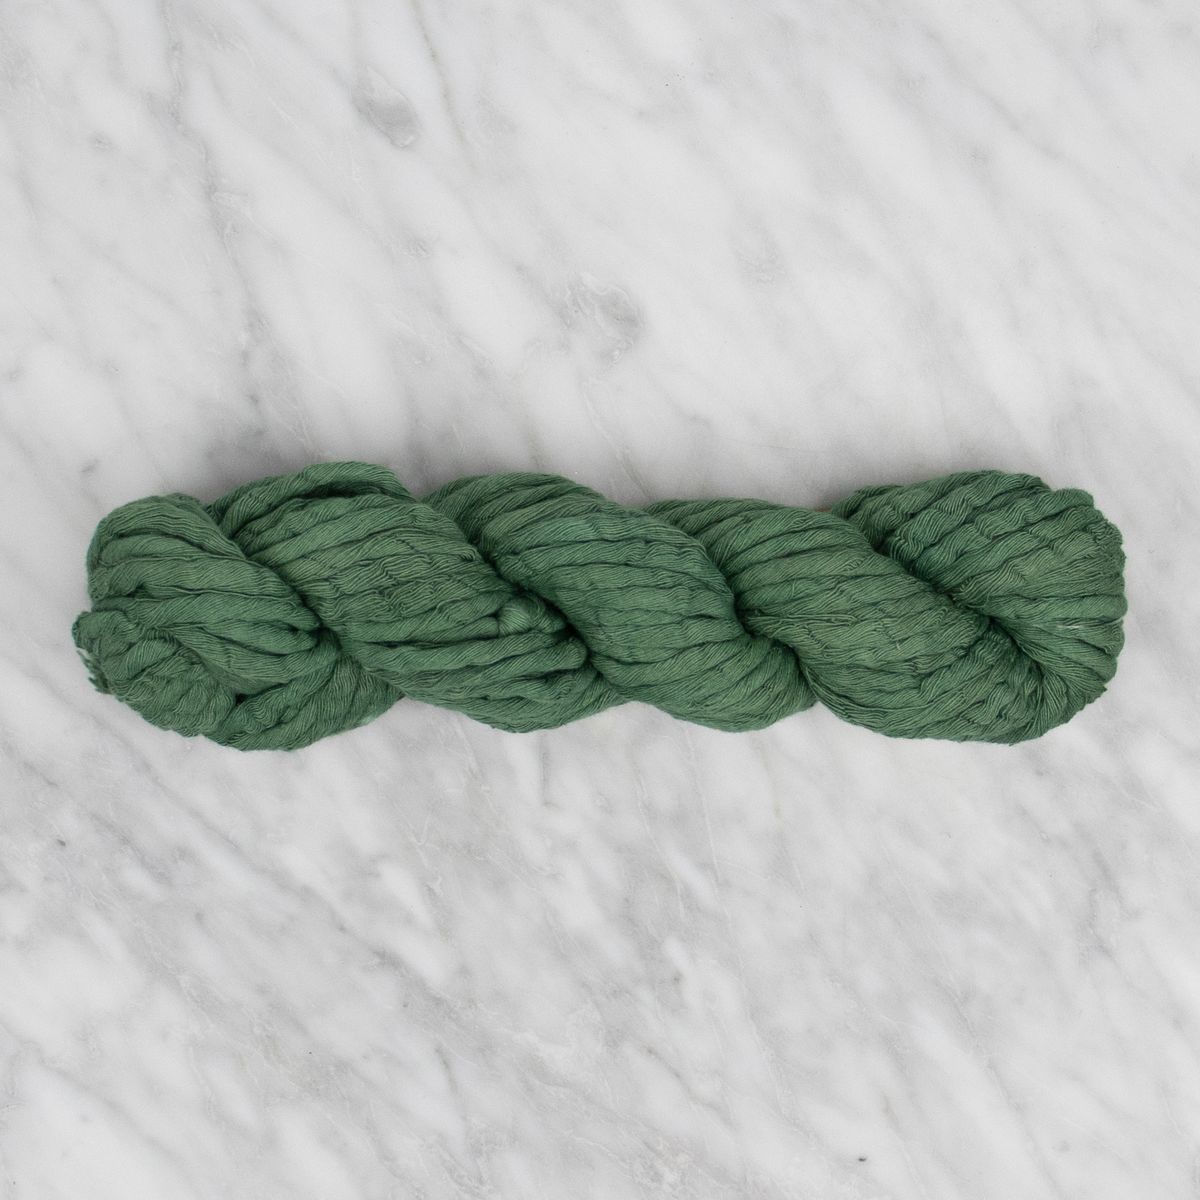 5mm Hand-Dyed Cotton String - Eucalyptus - 100 grams